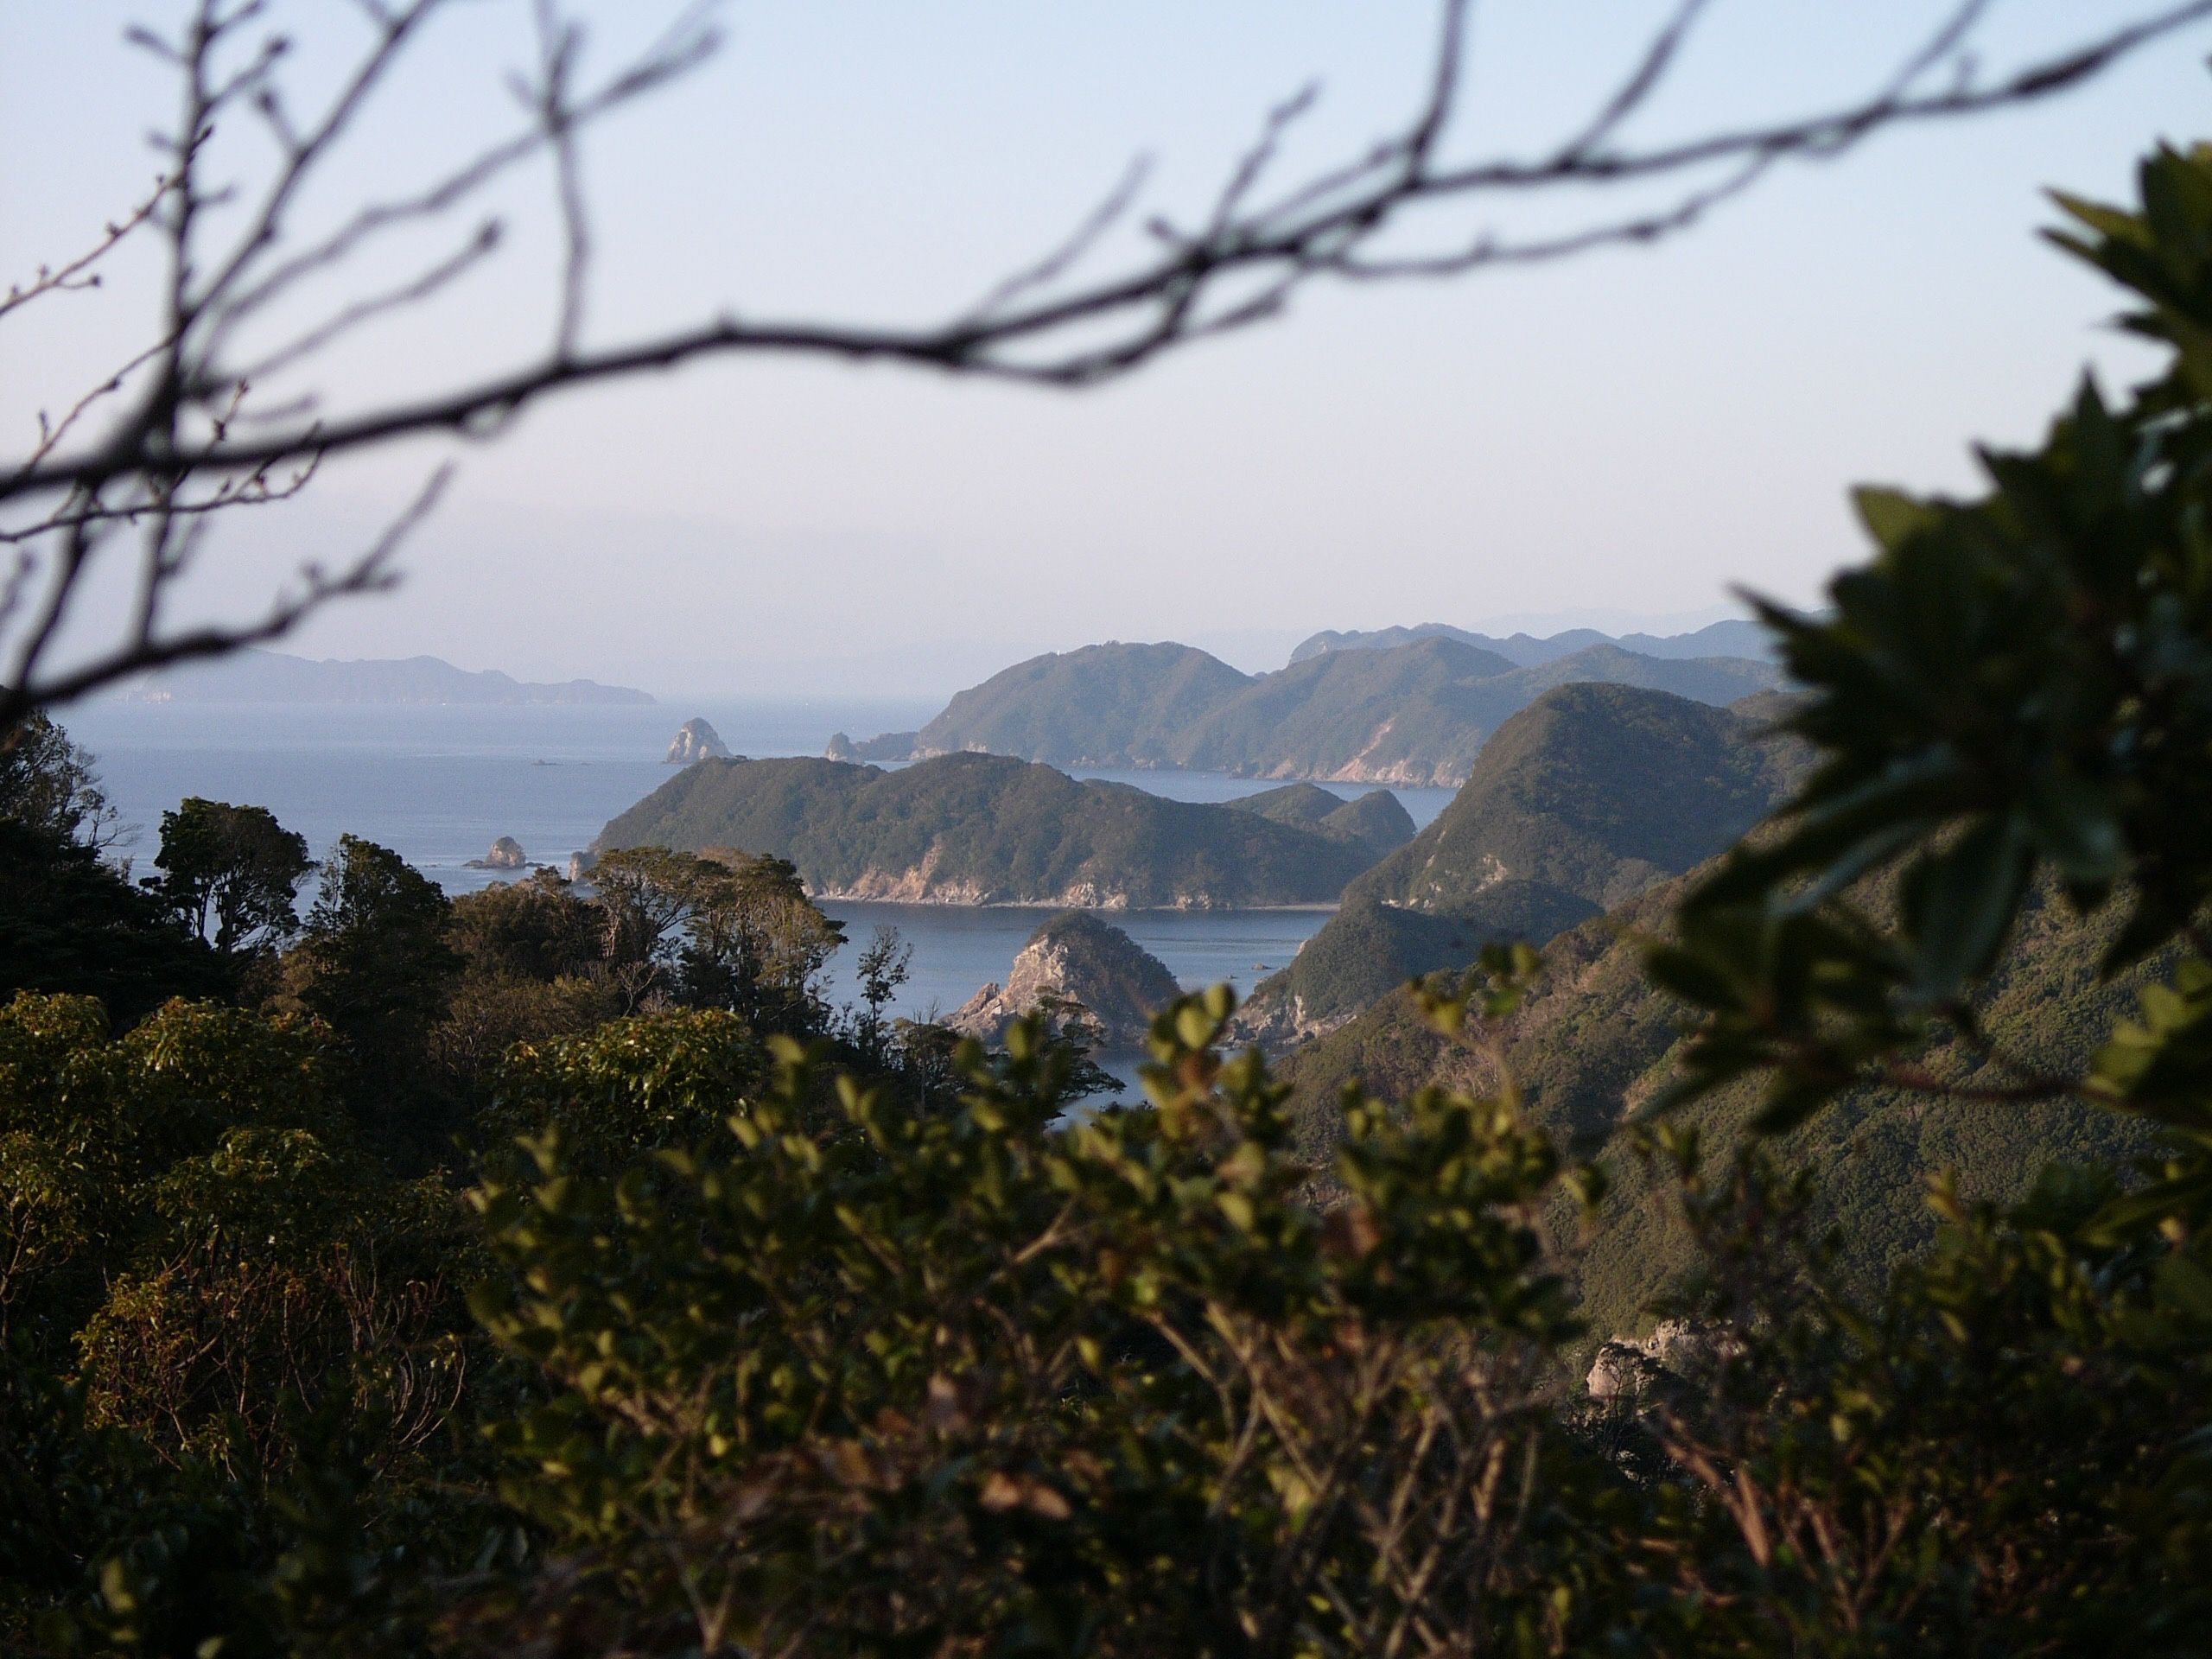 View of a coastline with many small islands and peninsulas.